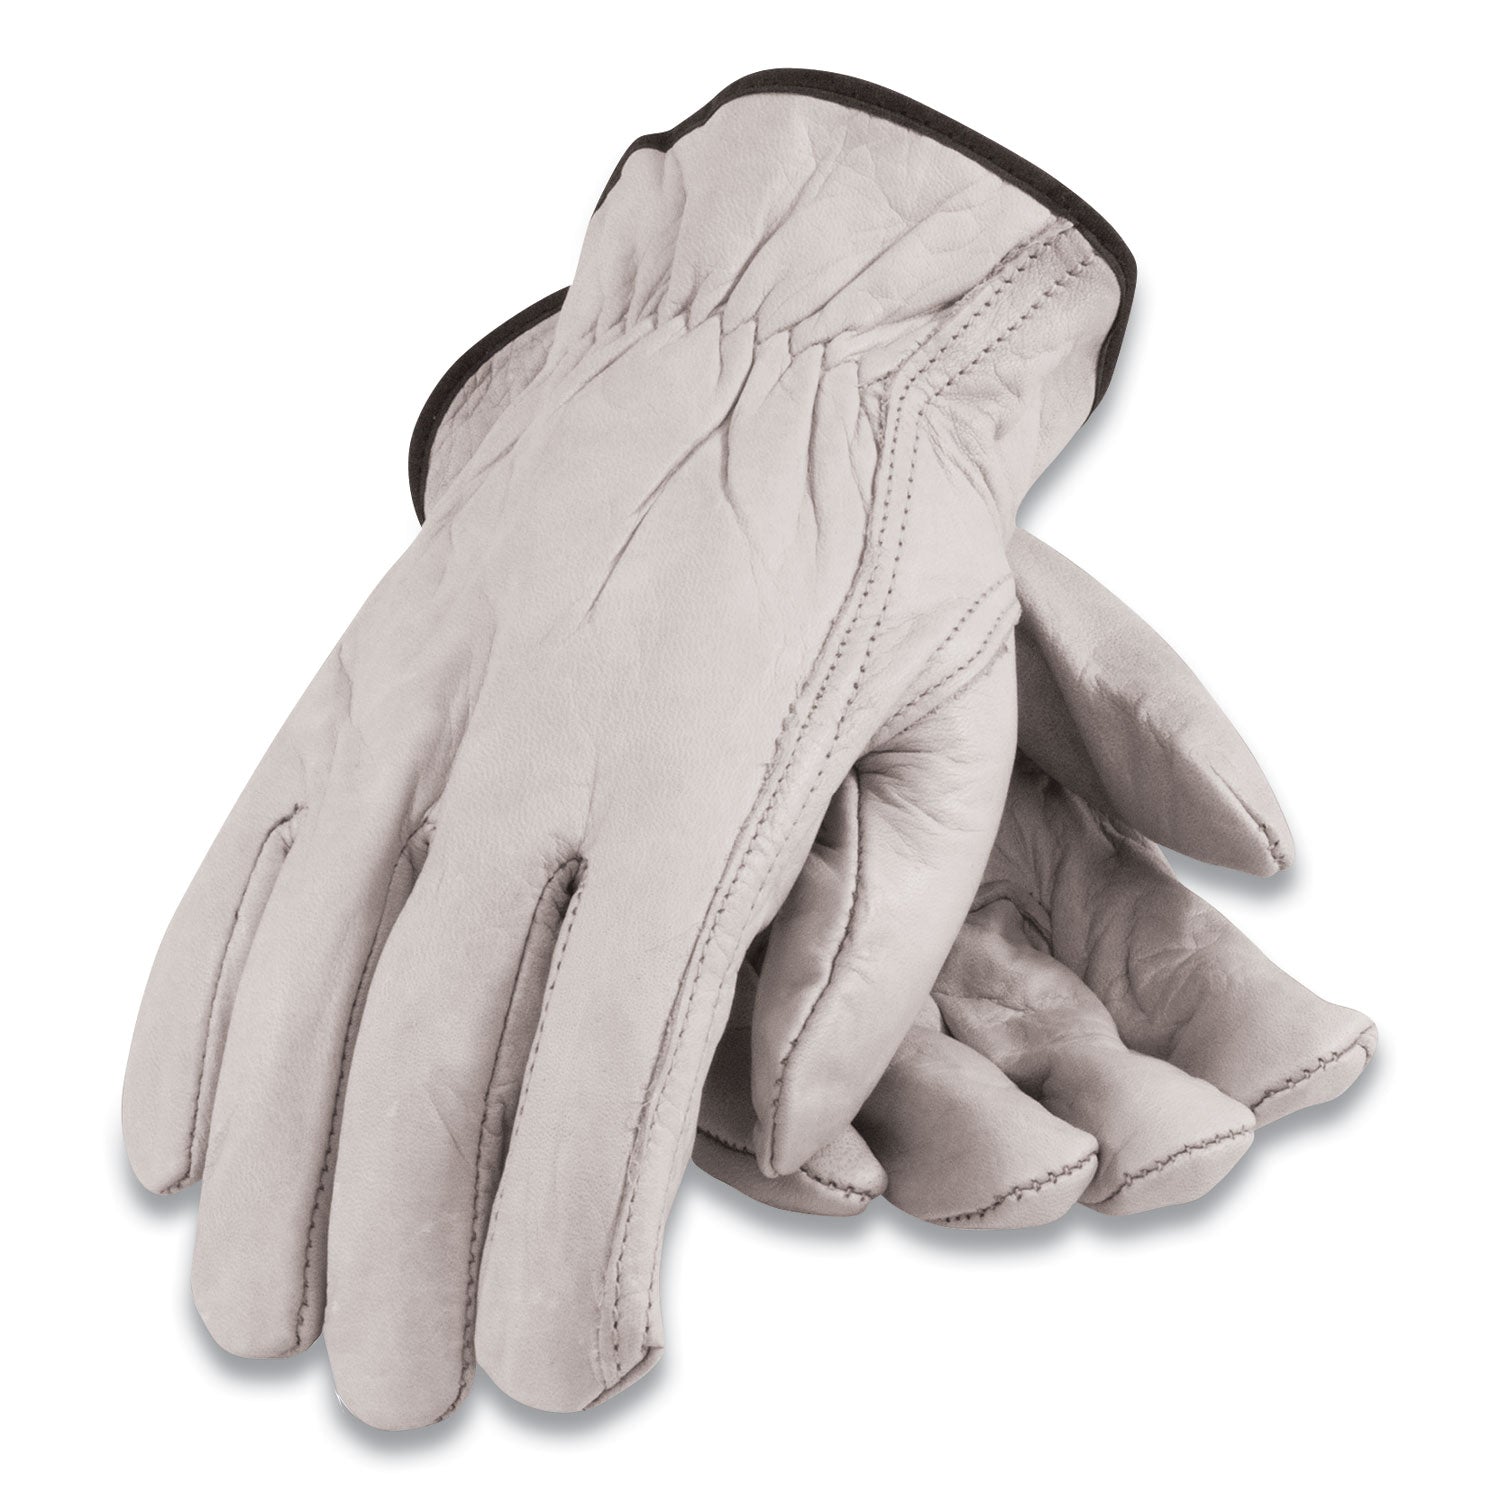 economy-grade-top-grain-cowhide-leather-work-gloves-x-large-tan_pid68162xl - 1